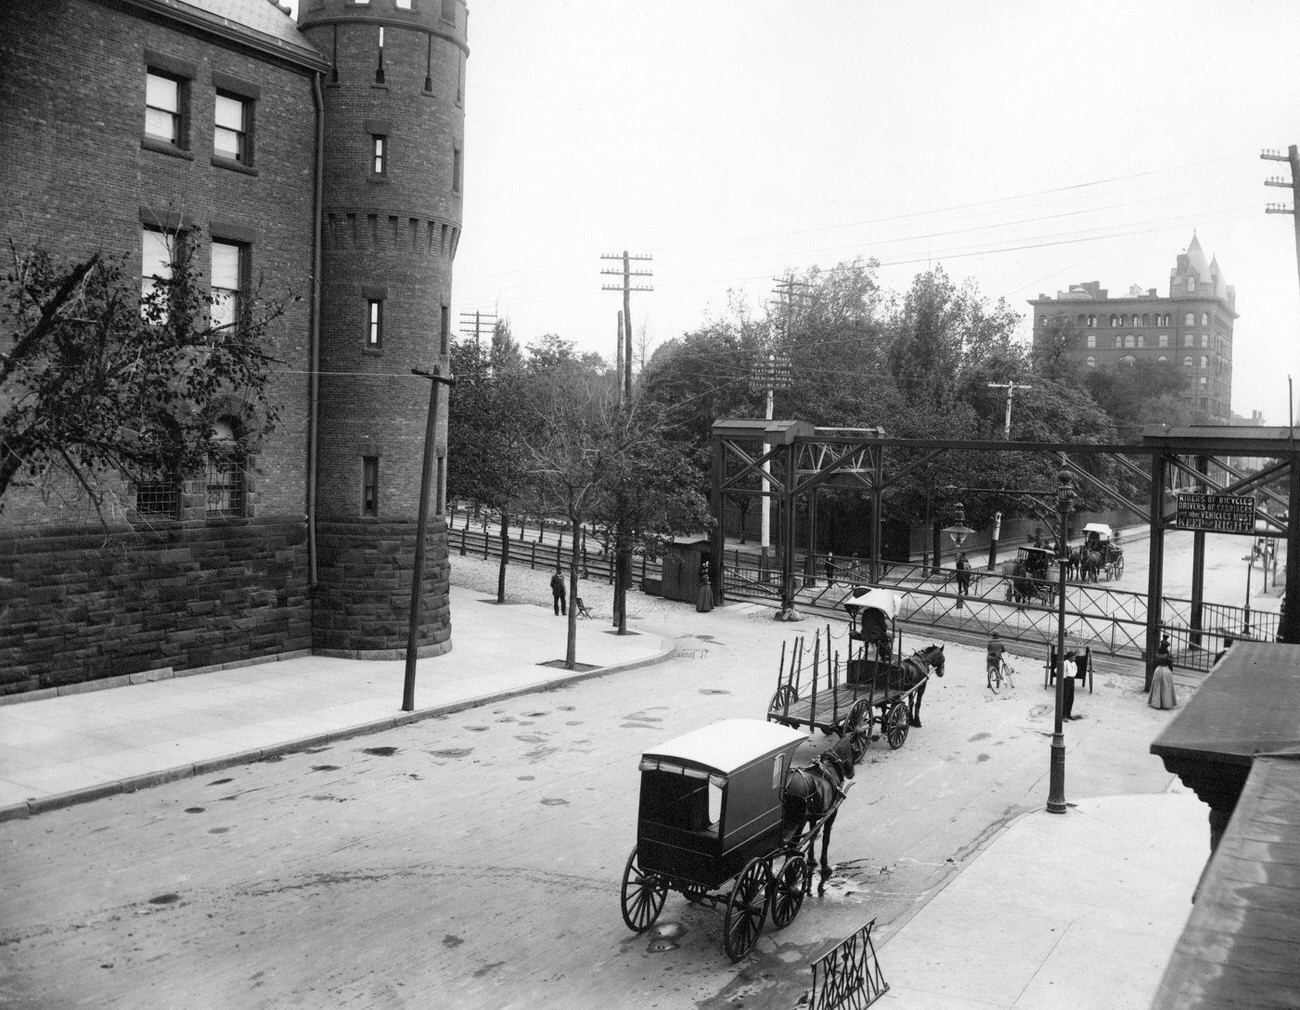 23Rd Regiment Armory On Bedford And Atlantic Avenues, Brooklyn, 1895.